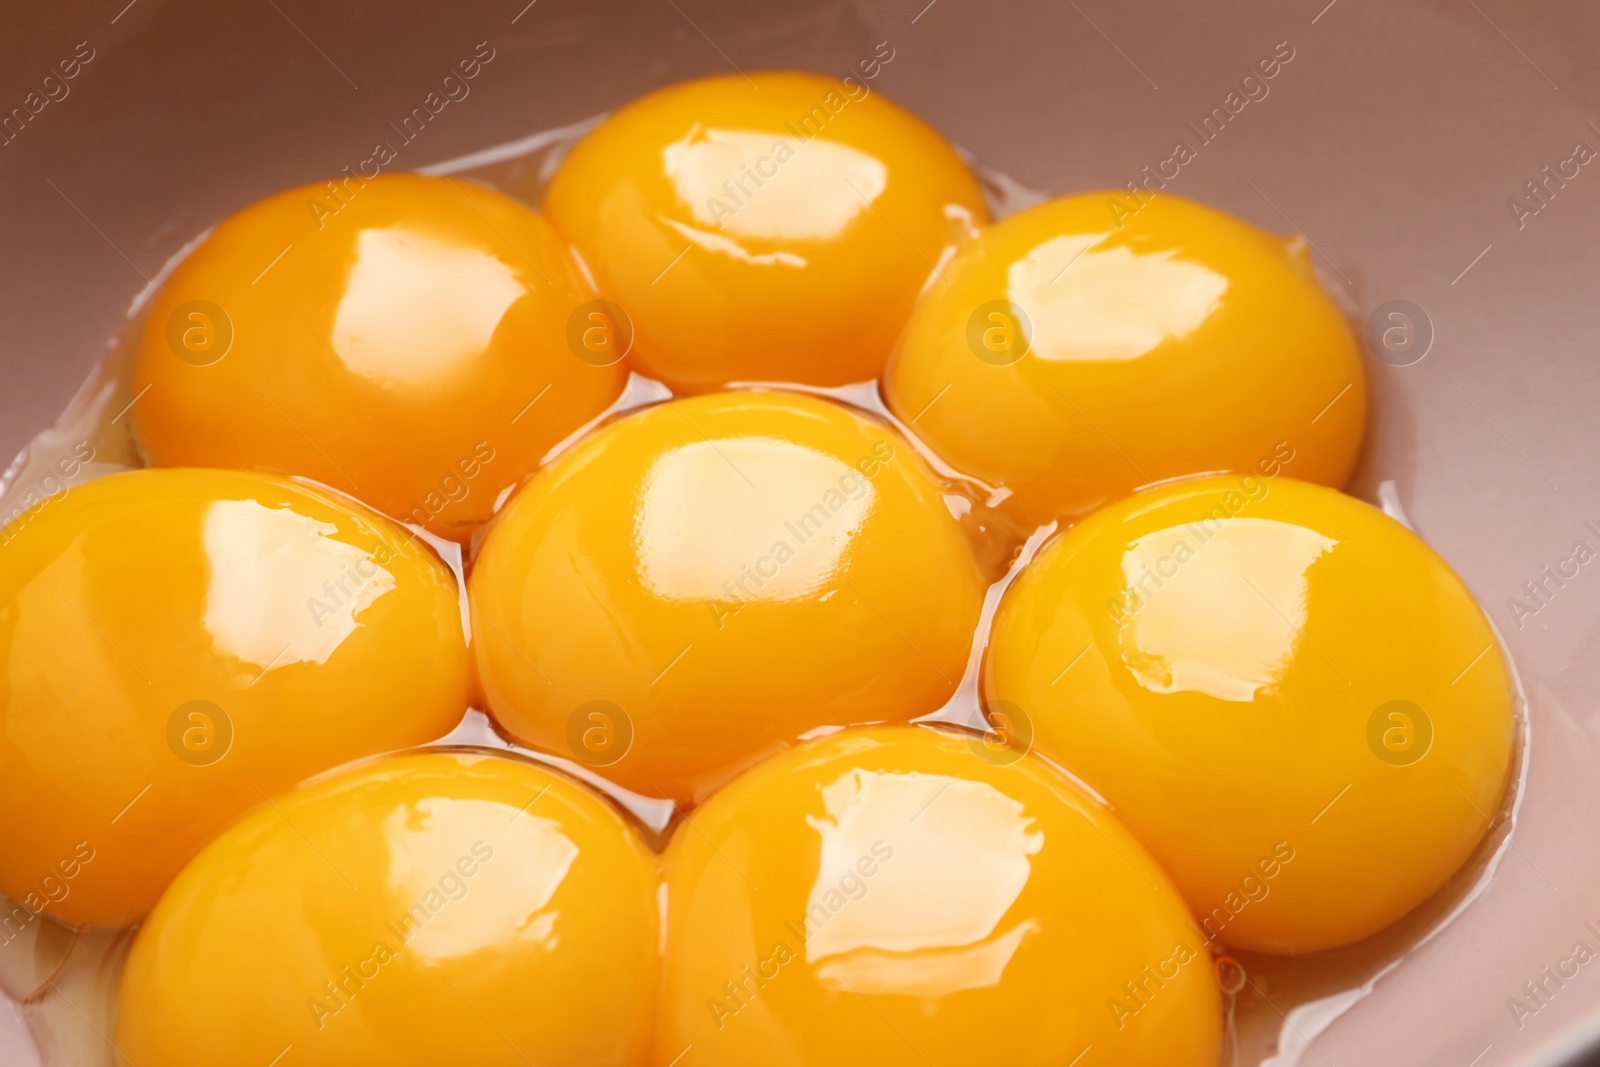 Photo of Bowl with raw egg yolks, closeup view